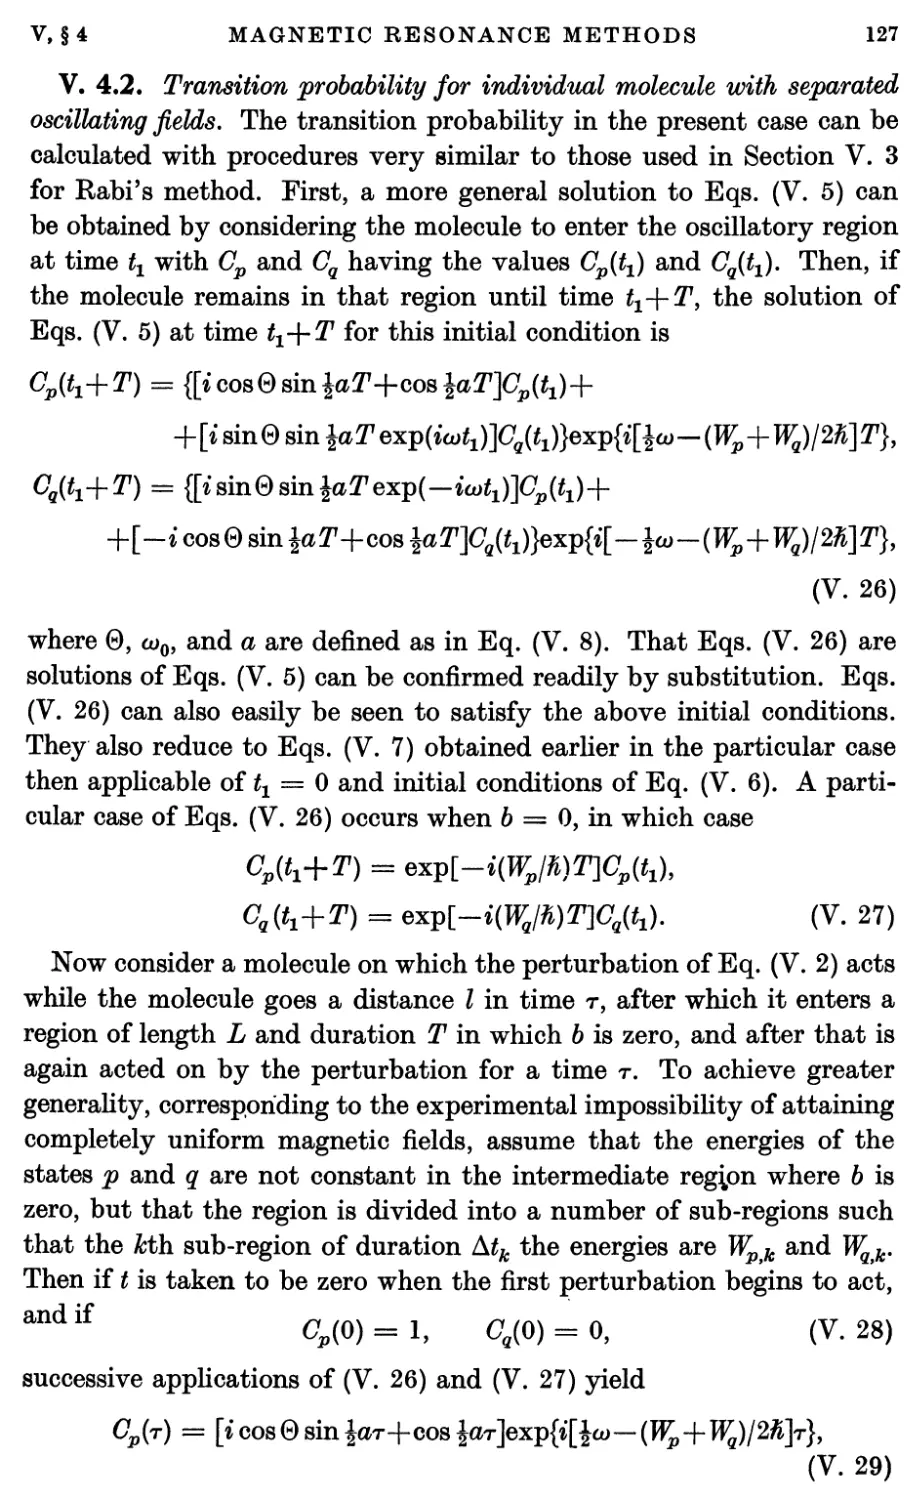 V.4.2. Transition probability for individual molecule with separated oscillating fields